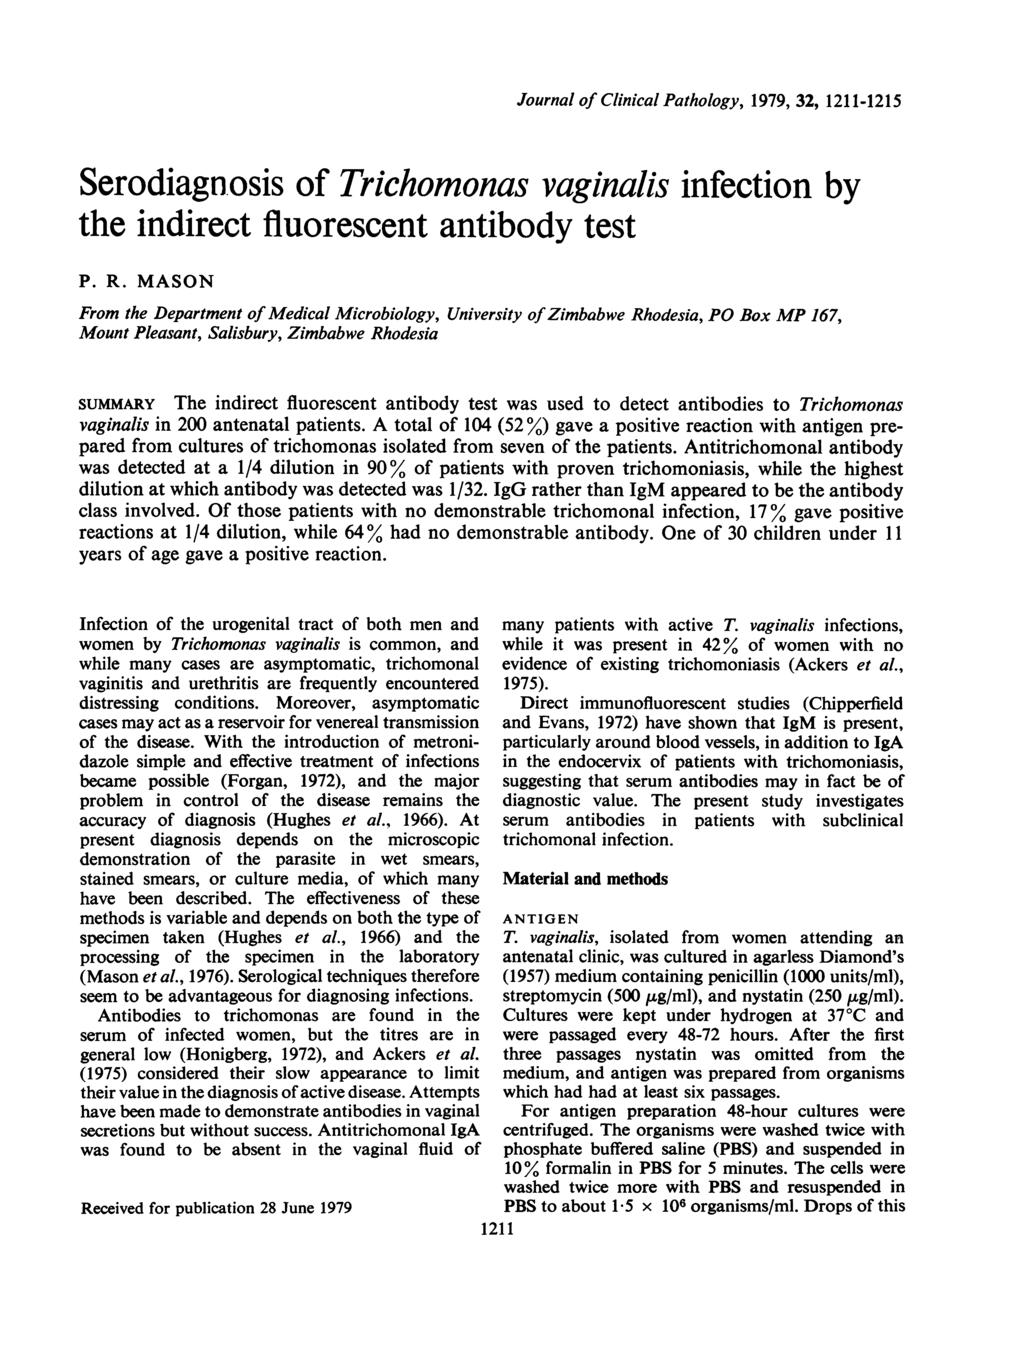 Journal of Clinical Pathology, 1979, 32, 1211-1215 Serodiagnosis of Trichomonas vaginalis infection by the indirect fluorescent antibody test P. R.